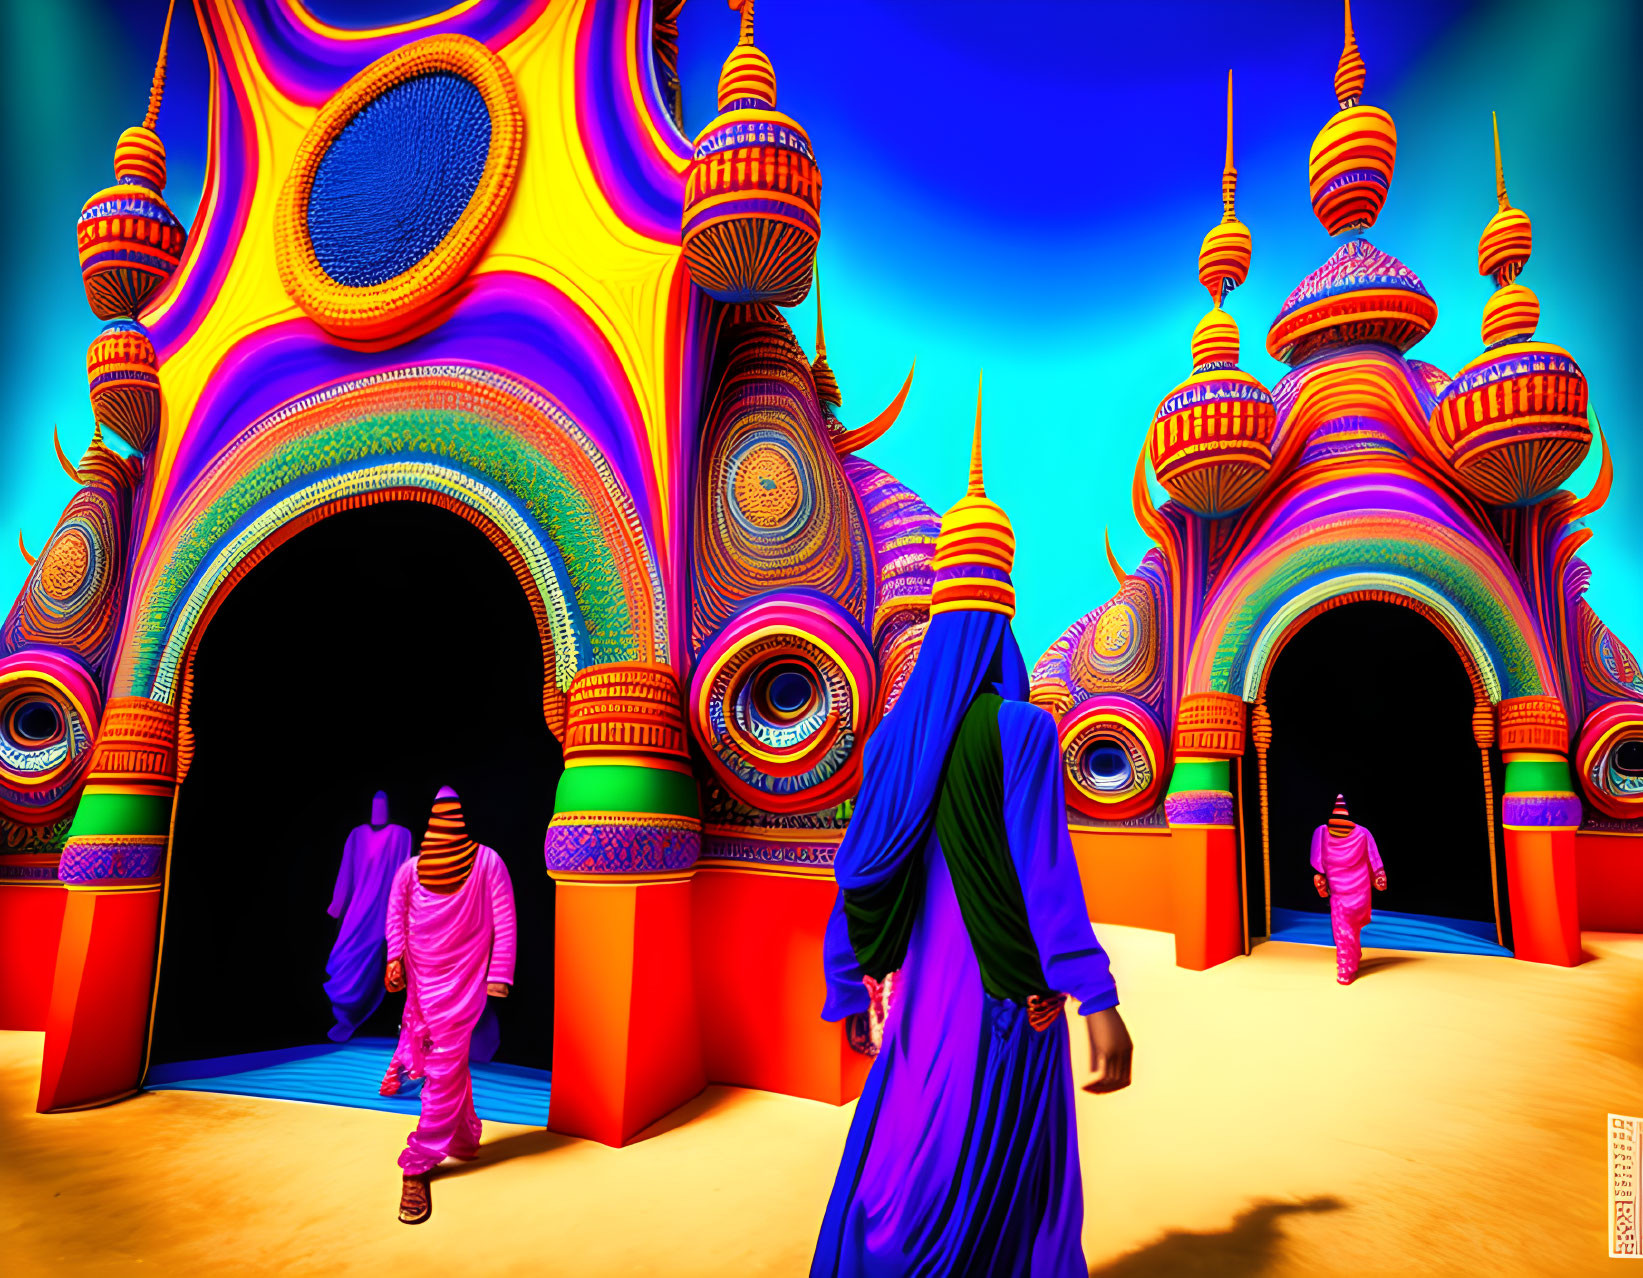 Vibrant psychedelic artwork of figures in robes near ornate structures